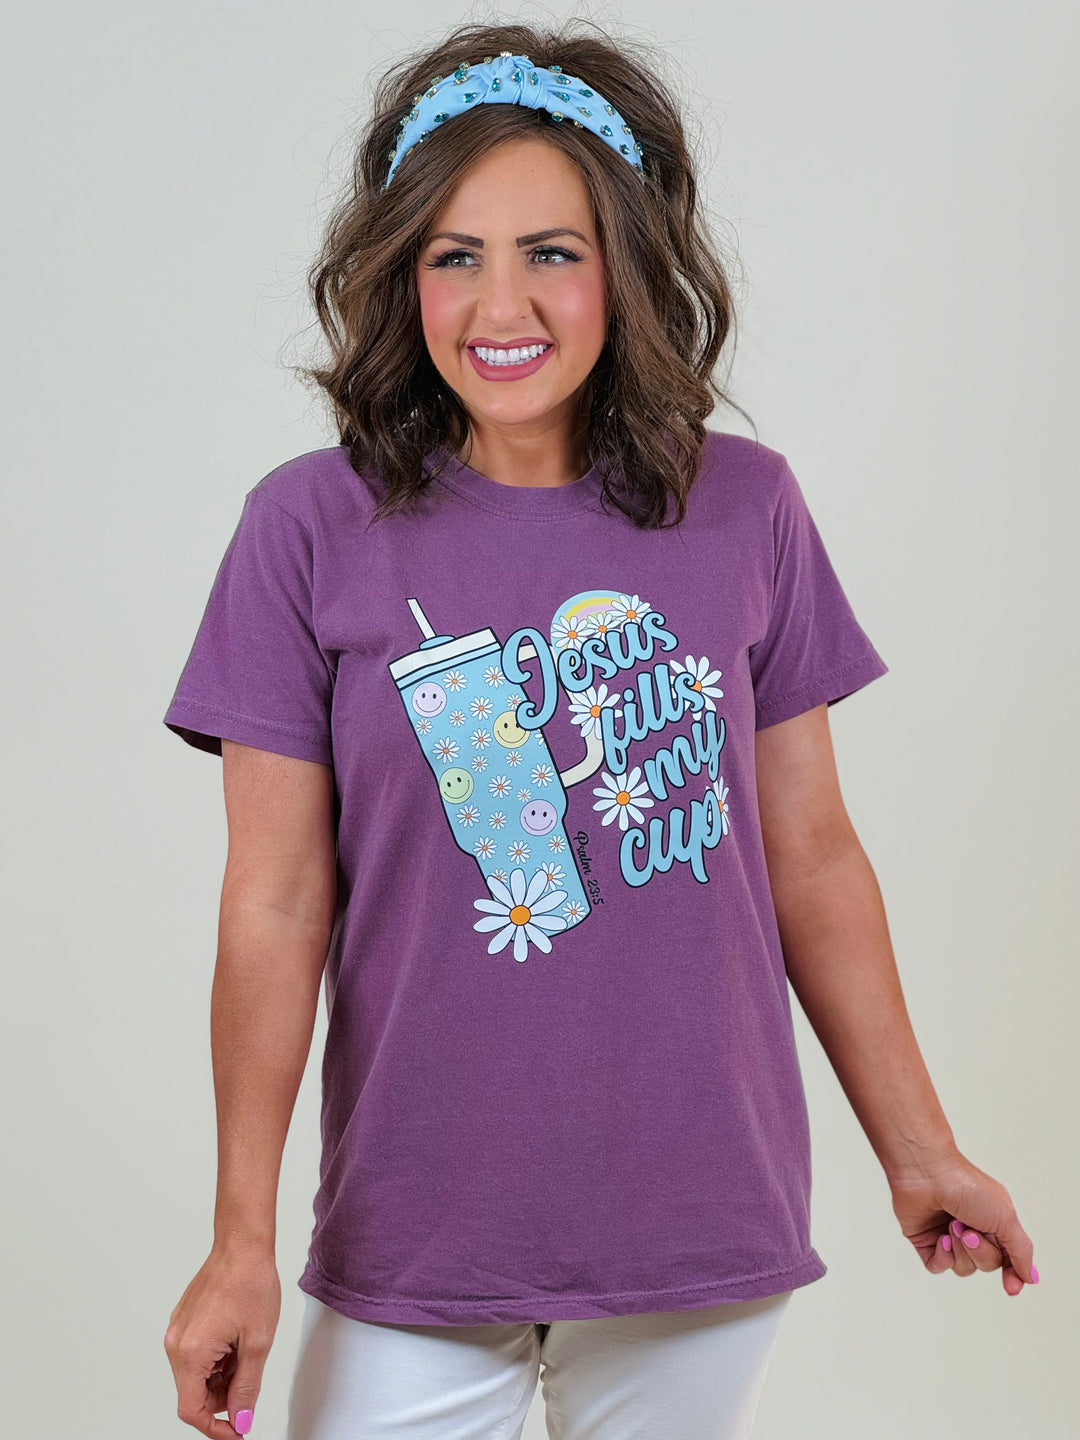 "Jesus Fills My Cup" - Sizes Small through Extended Sizes